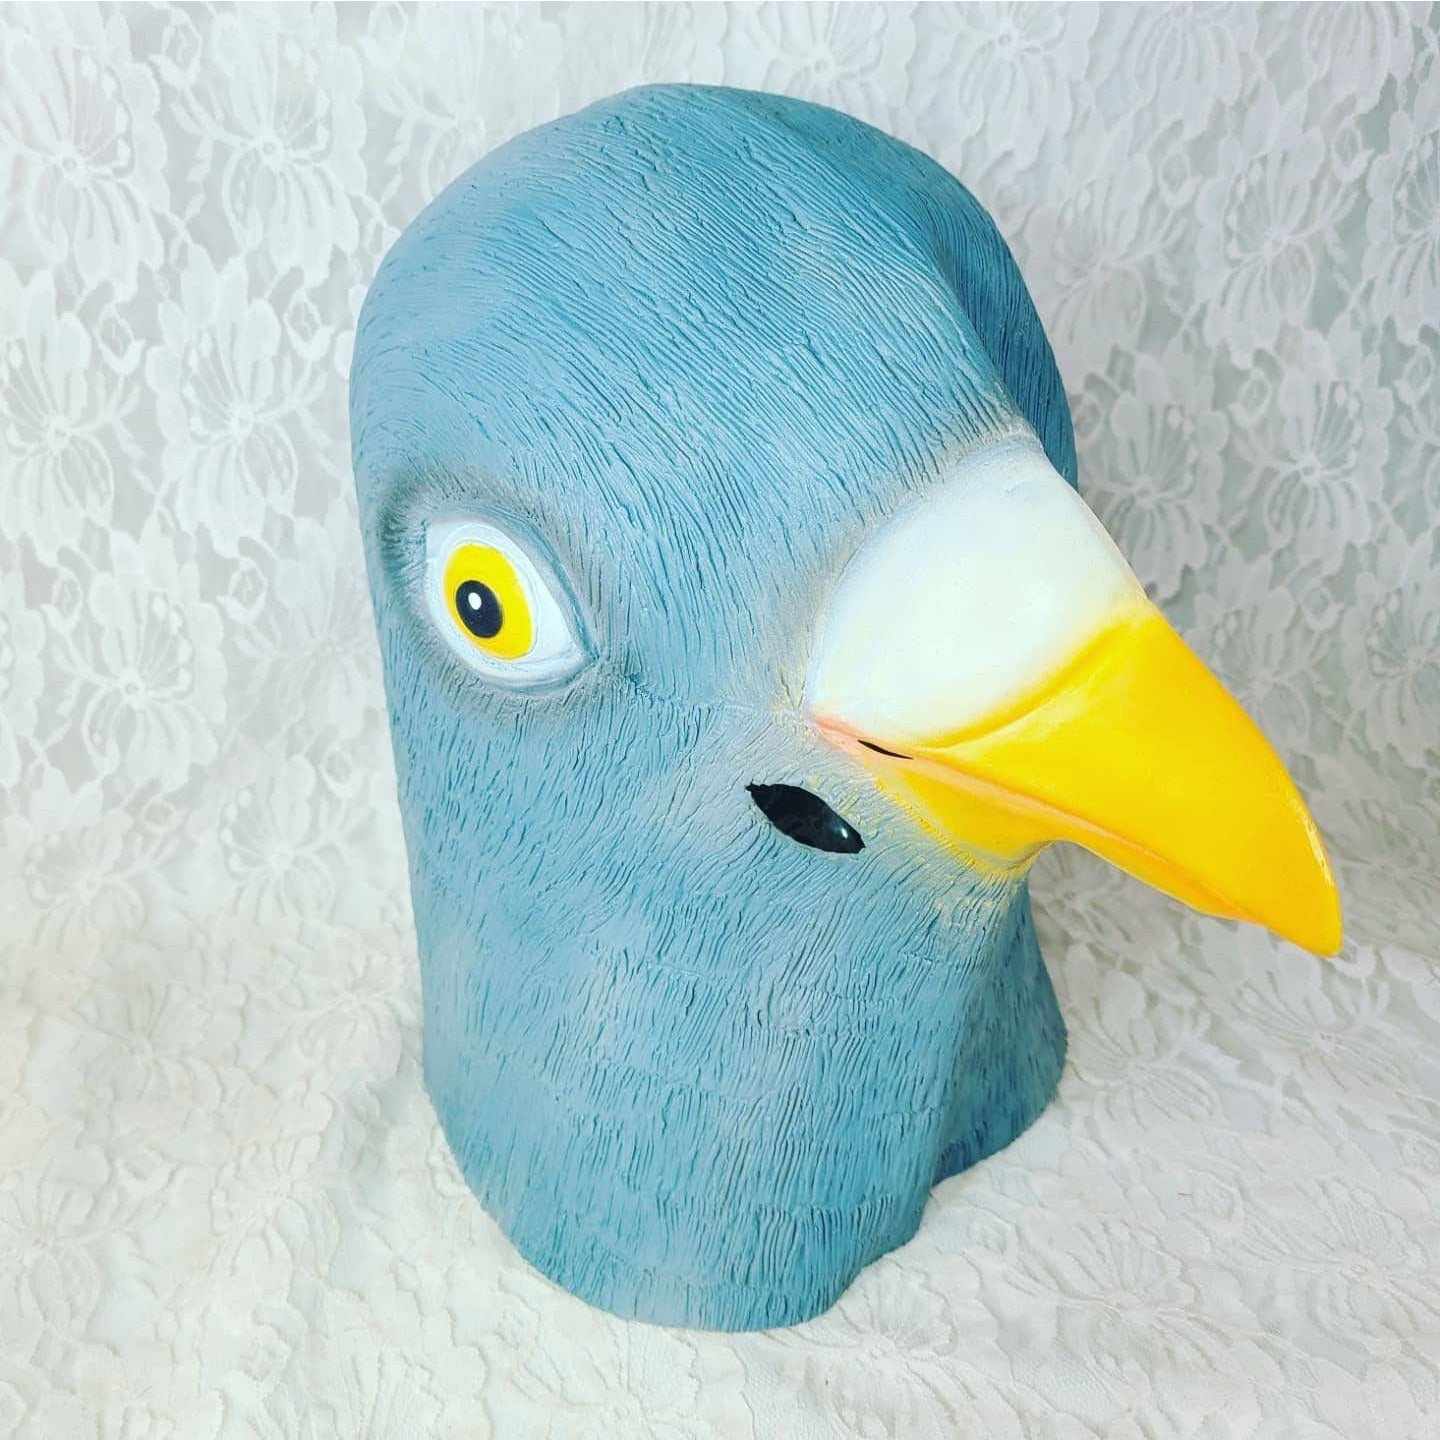 Blue Bird Head Mask Adult Full Head Cover ~ Be a GIANT BIRD ~ Vinyl ~ Theatrical Theater Mask ~ Cosplay RPG Masquerade Halloween